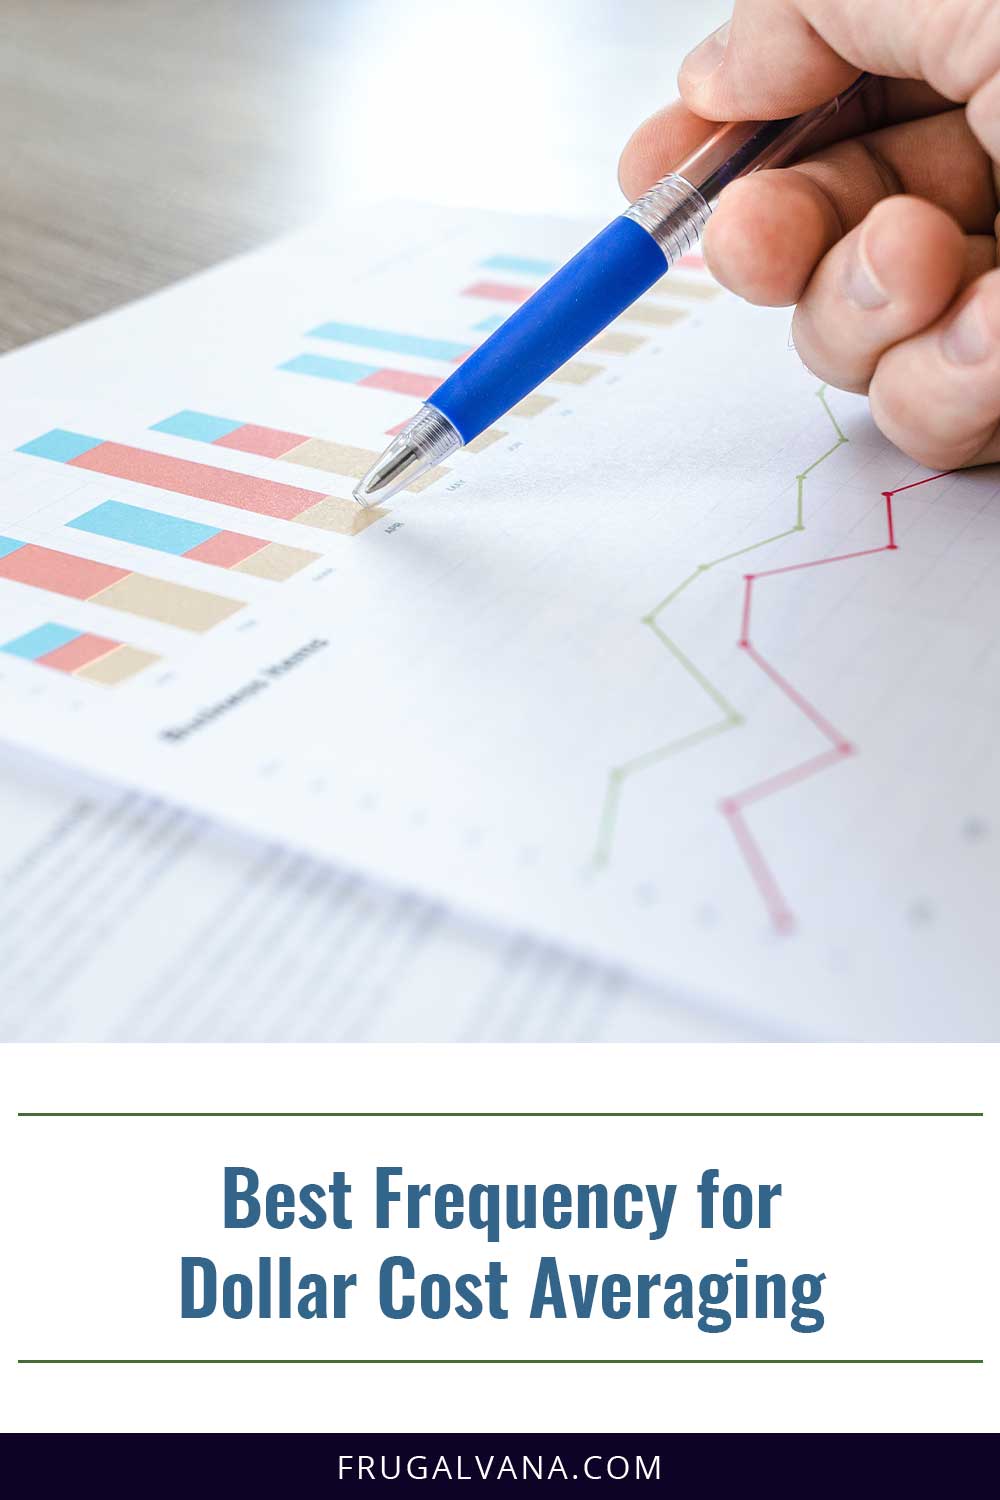 Best Frequency for Dollar Cost Averaging